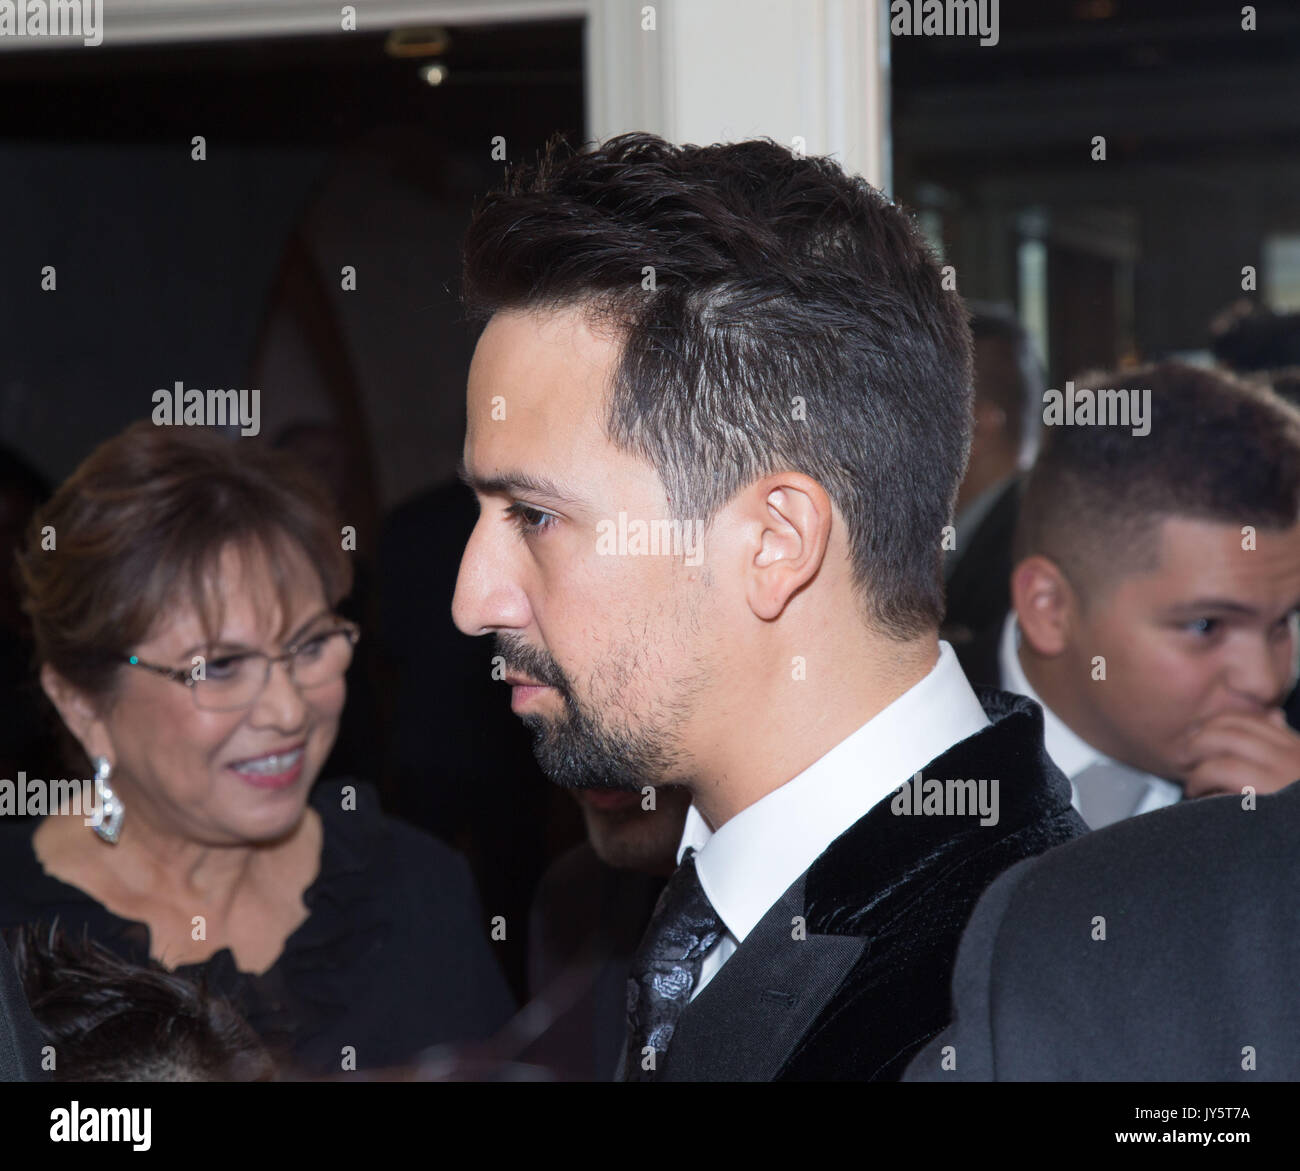 Beverly Hills,California,USA. 18th Aug,2017. Lin-Manuel Miranda attends 32nd Annual Imagen Awards Beverly Wilshire Four Seasons Hotel August 18,2017 Beverly Hills,California. Stock Photo